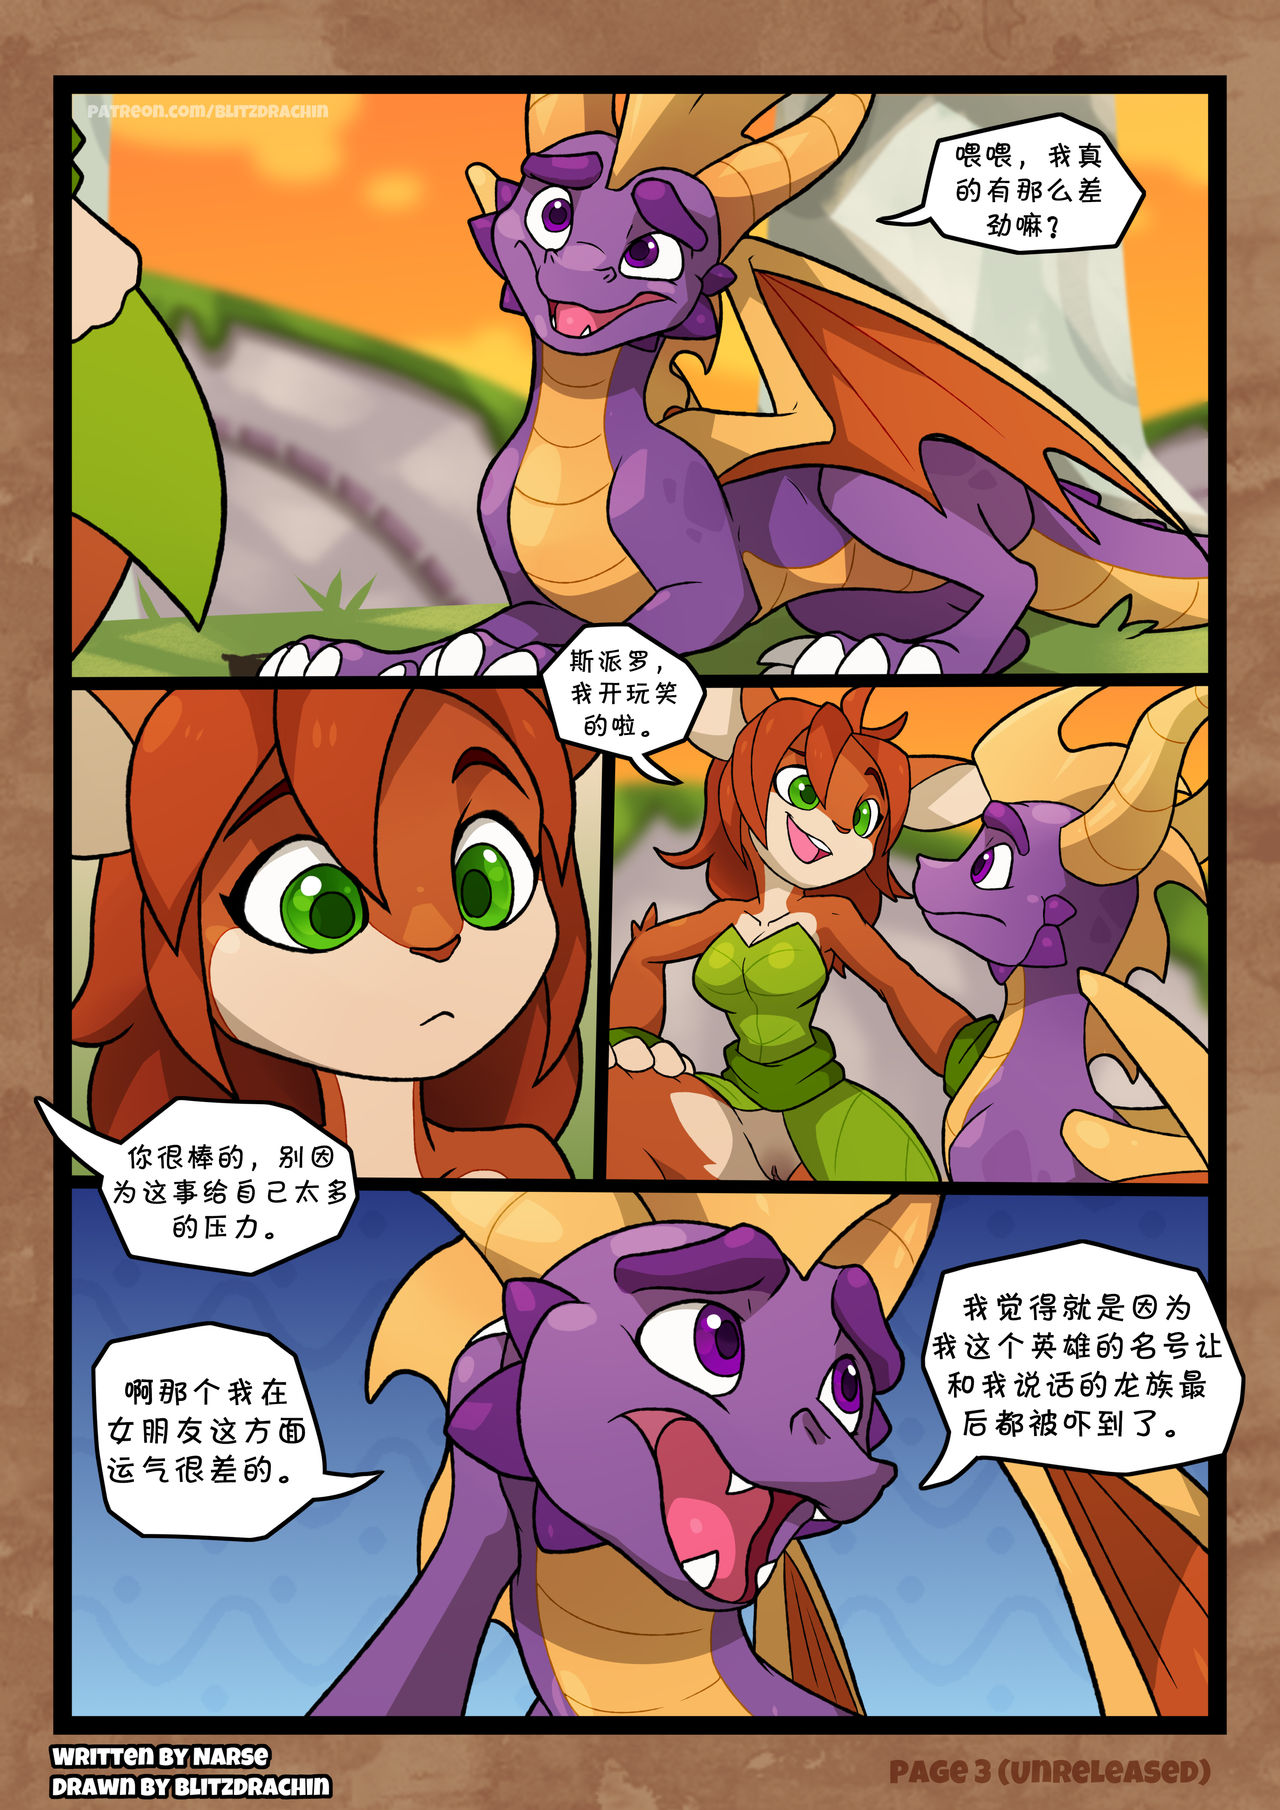 [Blitzdrachin] A Time with the Hero (Spyro the Dragon) [Chinese] [846] 